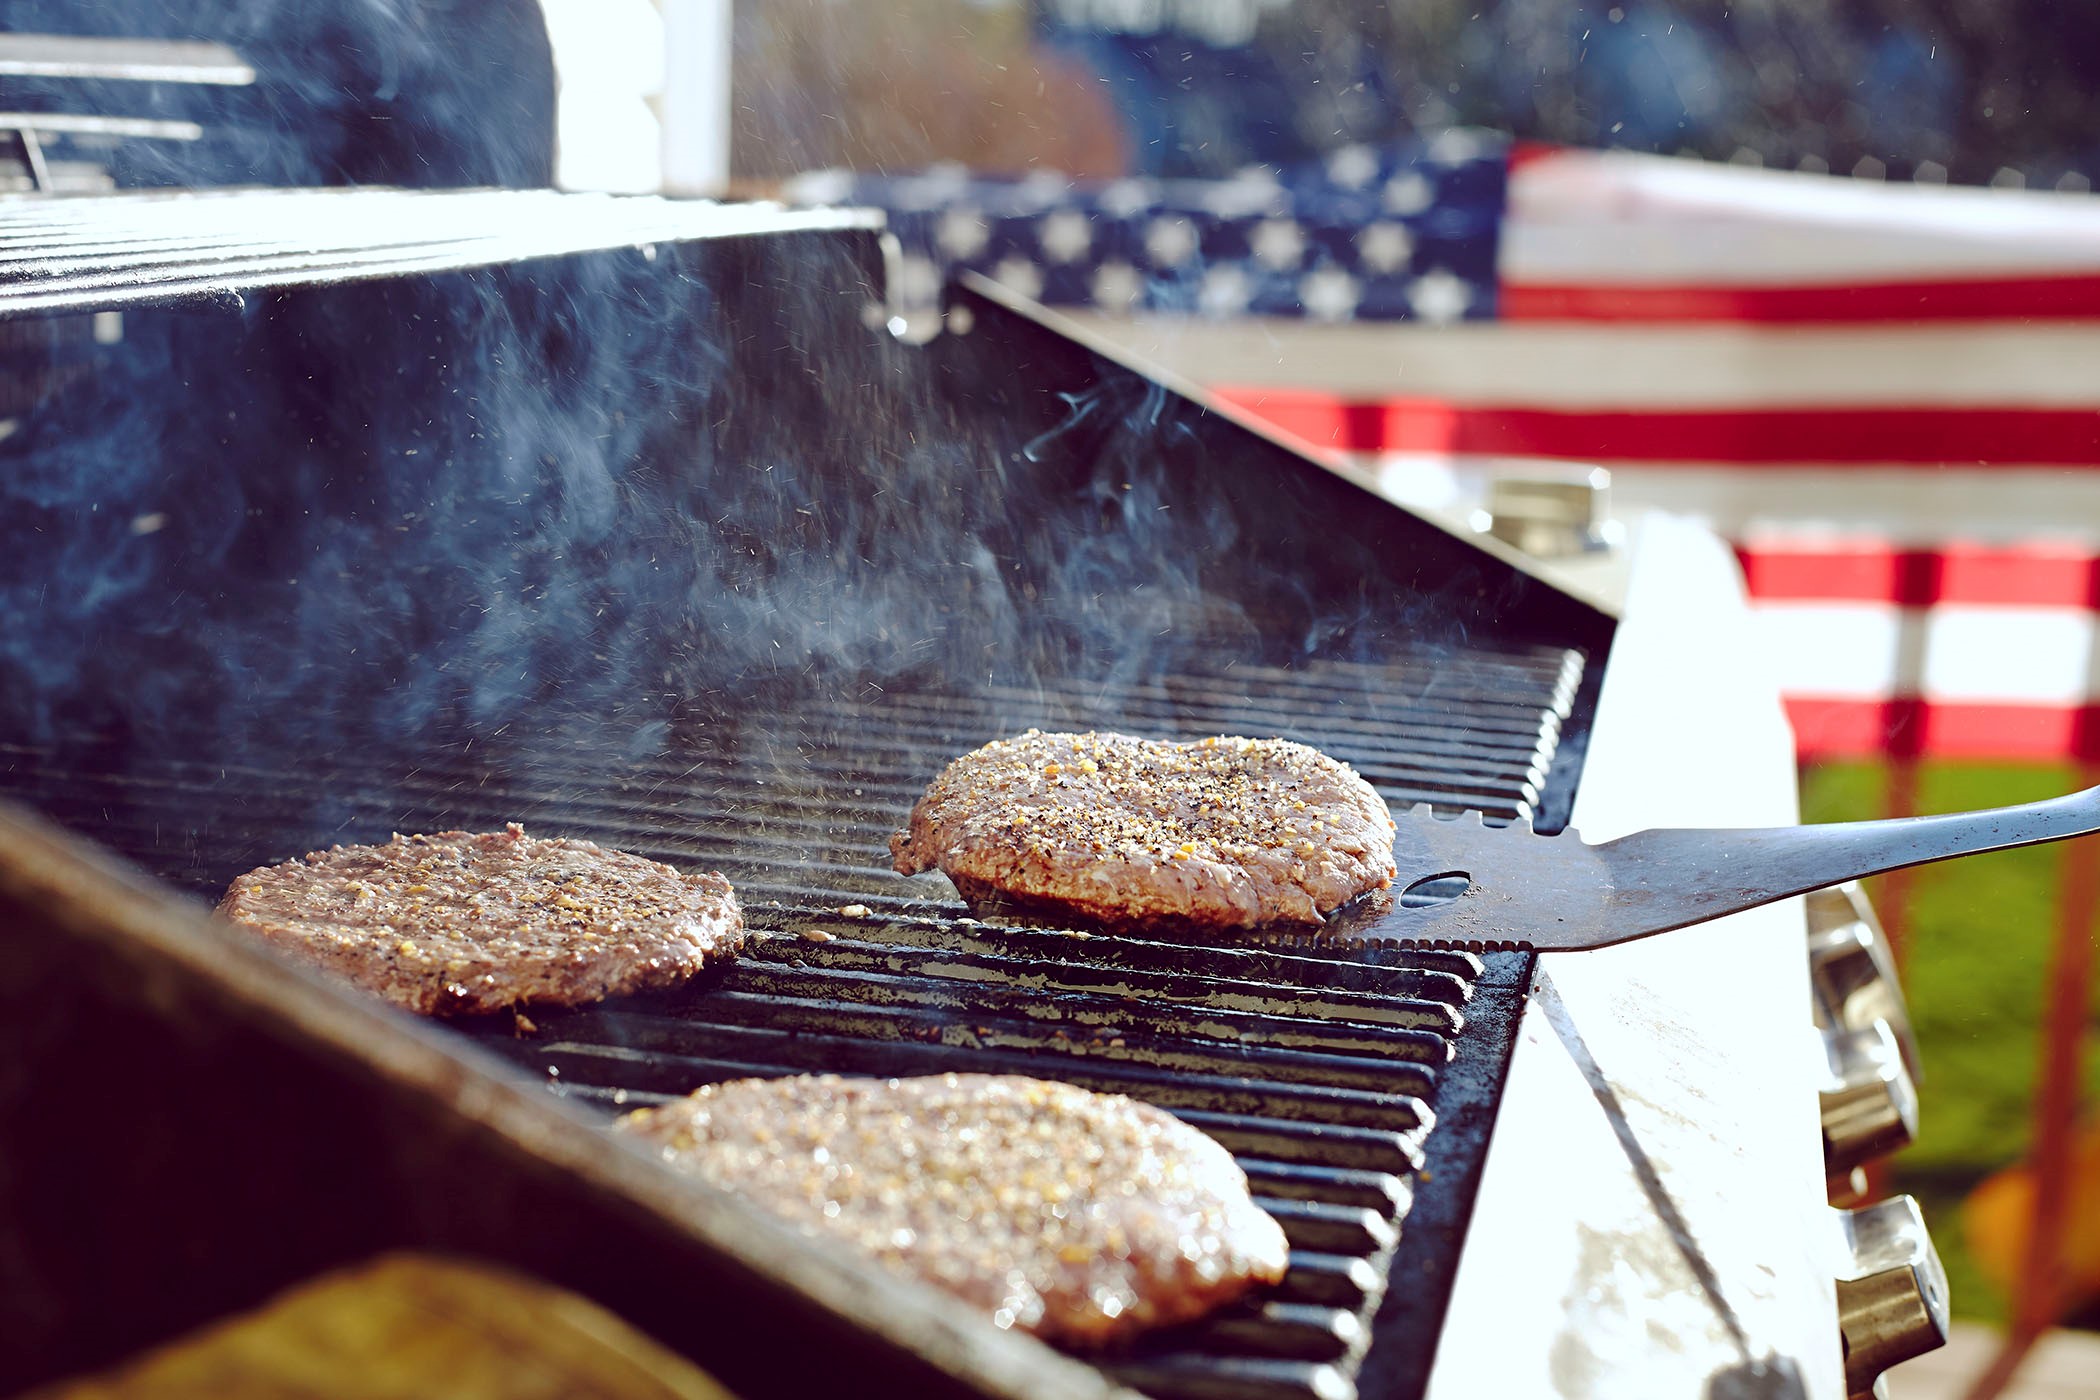 Unseasonable Weather This Summer Limiting the Usual Boost in Beef Demand as Grills Stay Cold